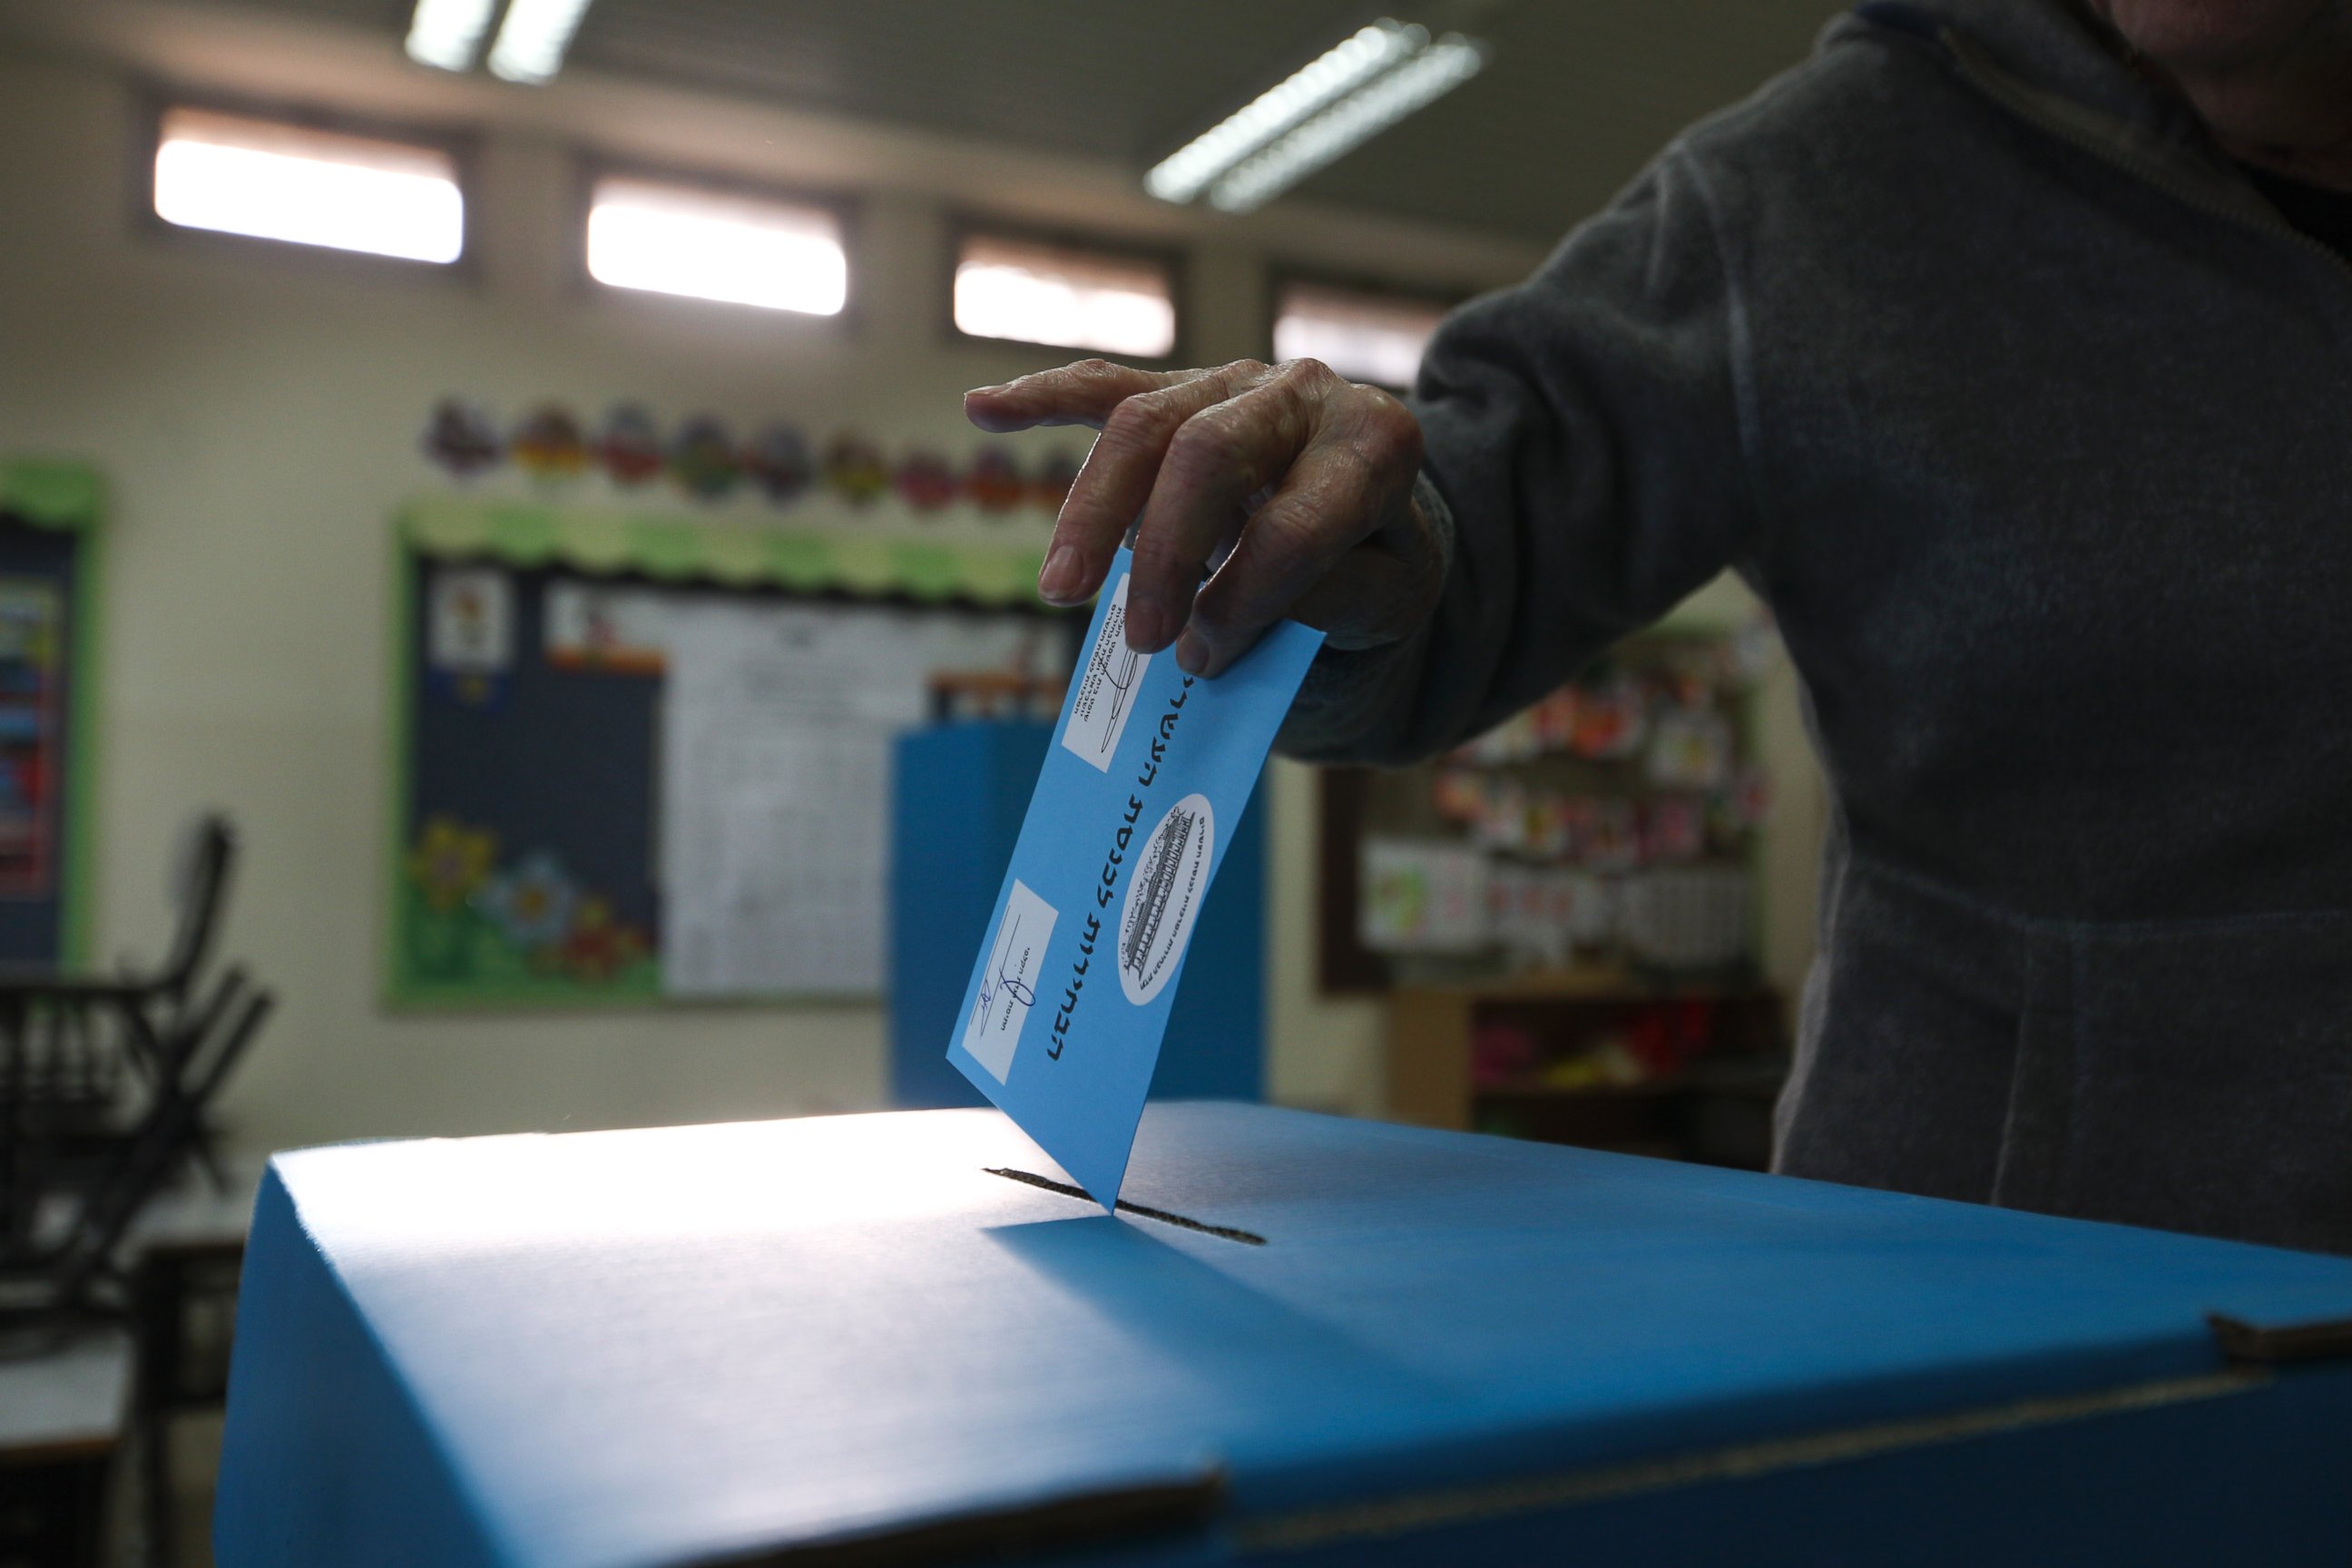 A man cast his vote during legislative elections in Tel Aviv, Israel, Tuesday, March 17, 2015. Israelis are voting in early parliament elections following a campaign focused on economic issues.